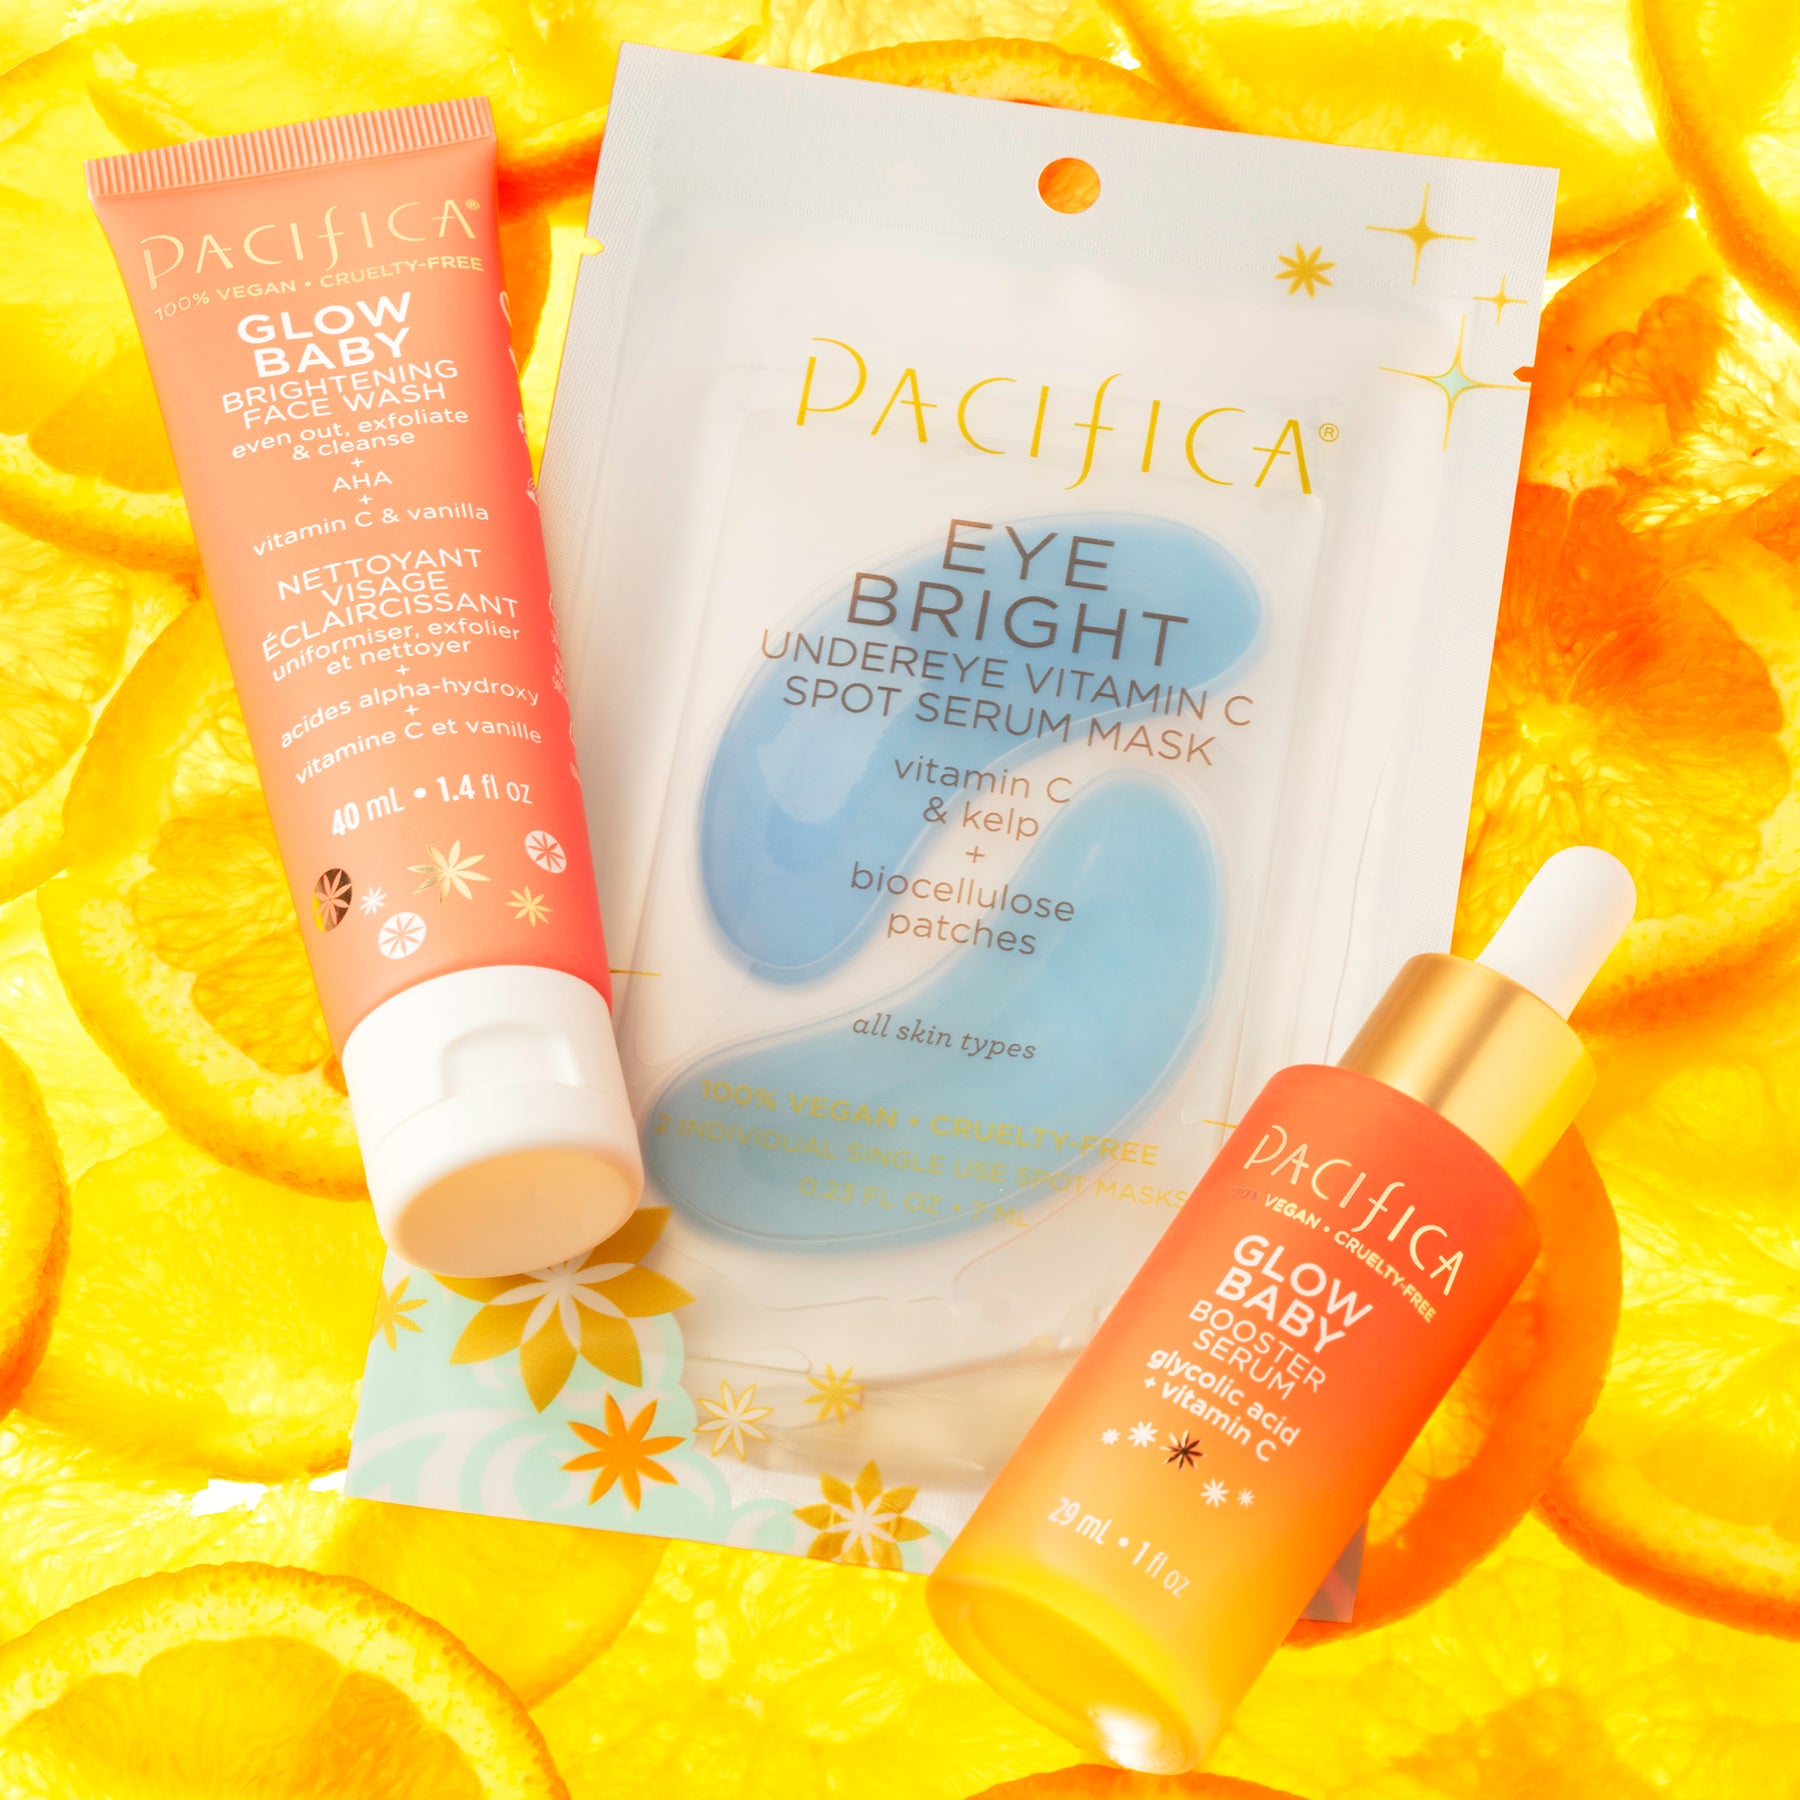 Glow Baby Skincare Trial Kit - - Pacifica Beauty